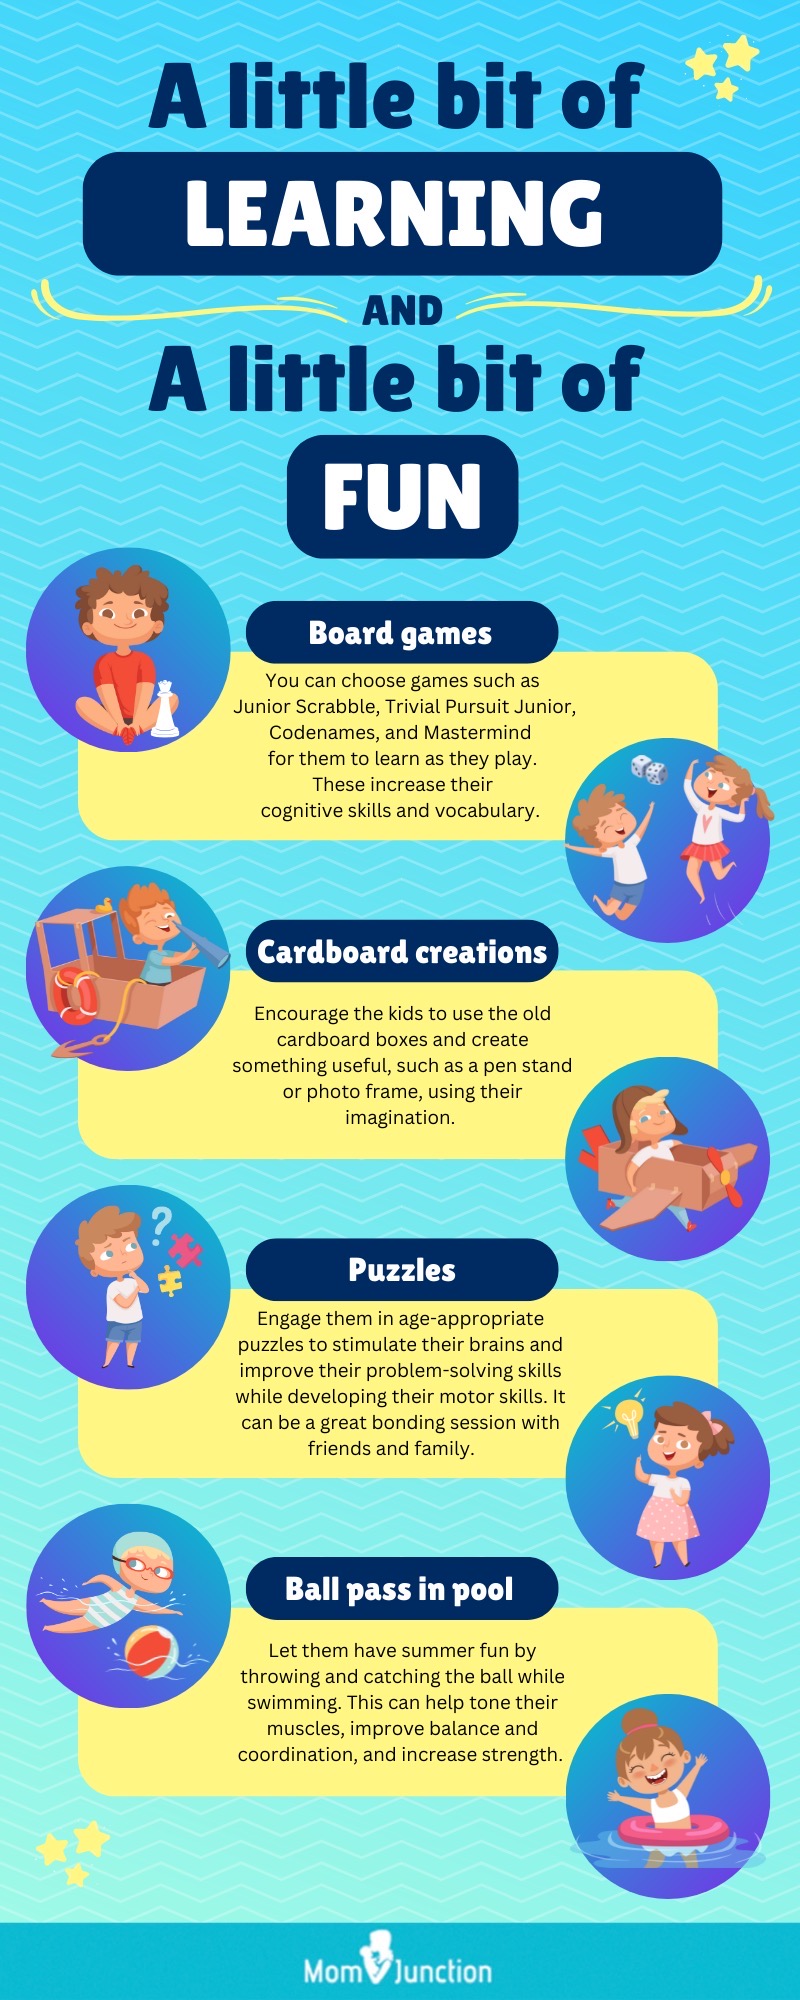 Top 8 Engaging Educational Kids Games That Help With Online Classes